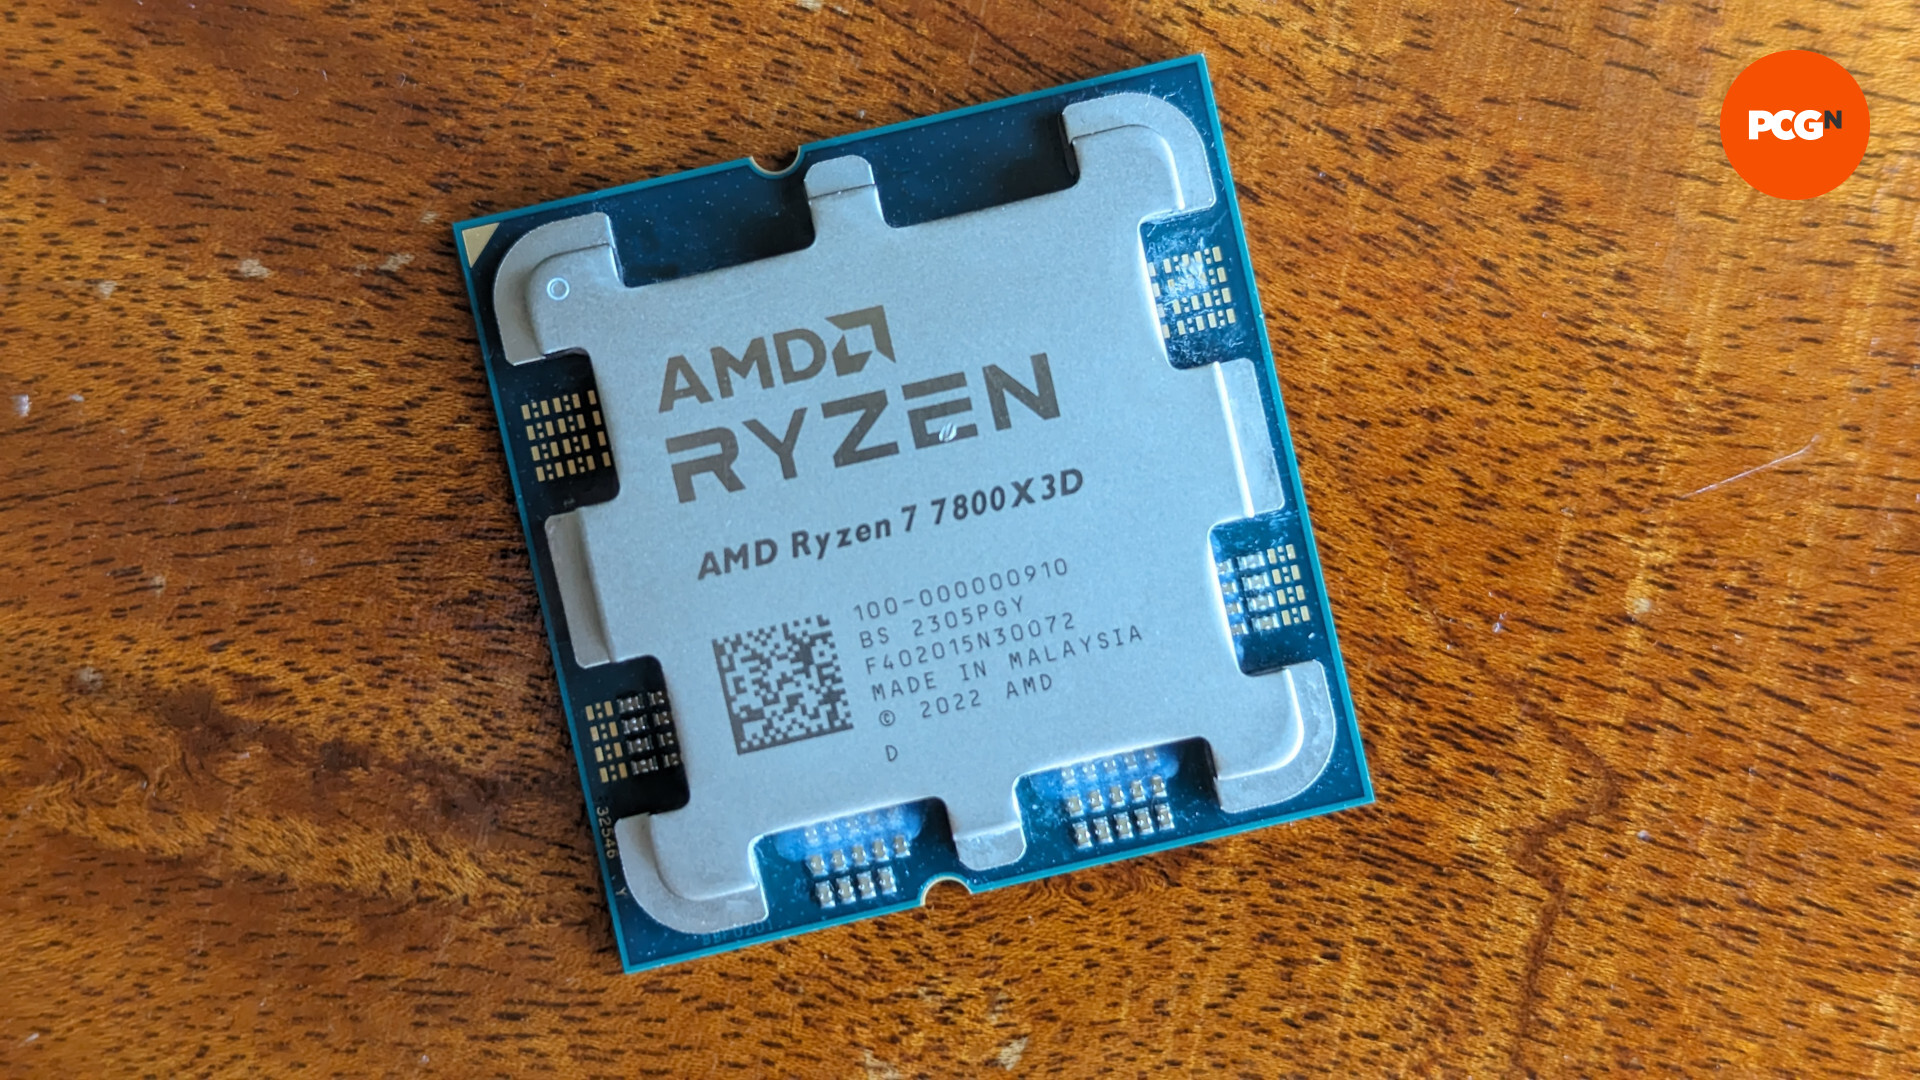 AMD Ryzen 7 7800X3D review: The CPU rests against a wooden surface